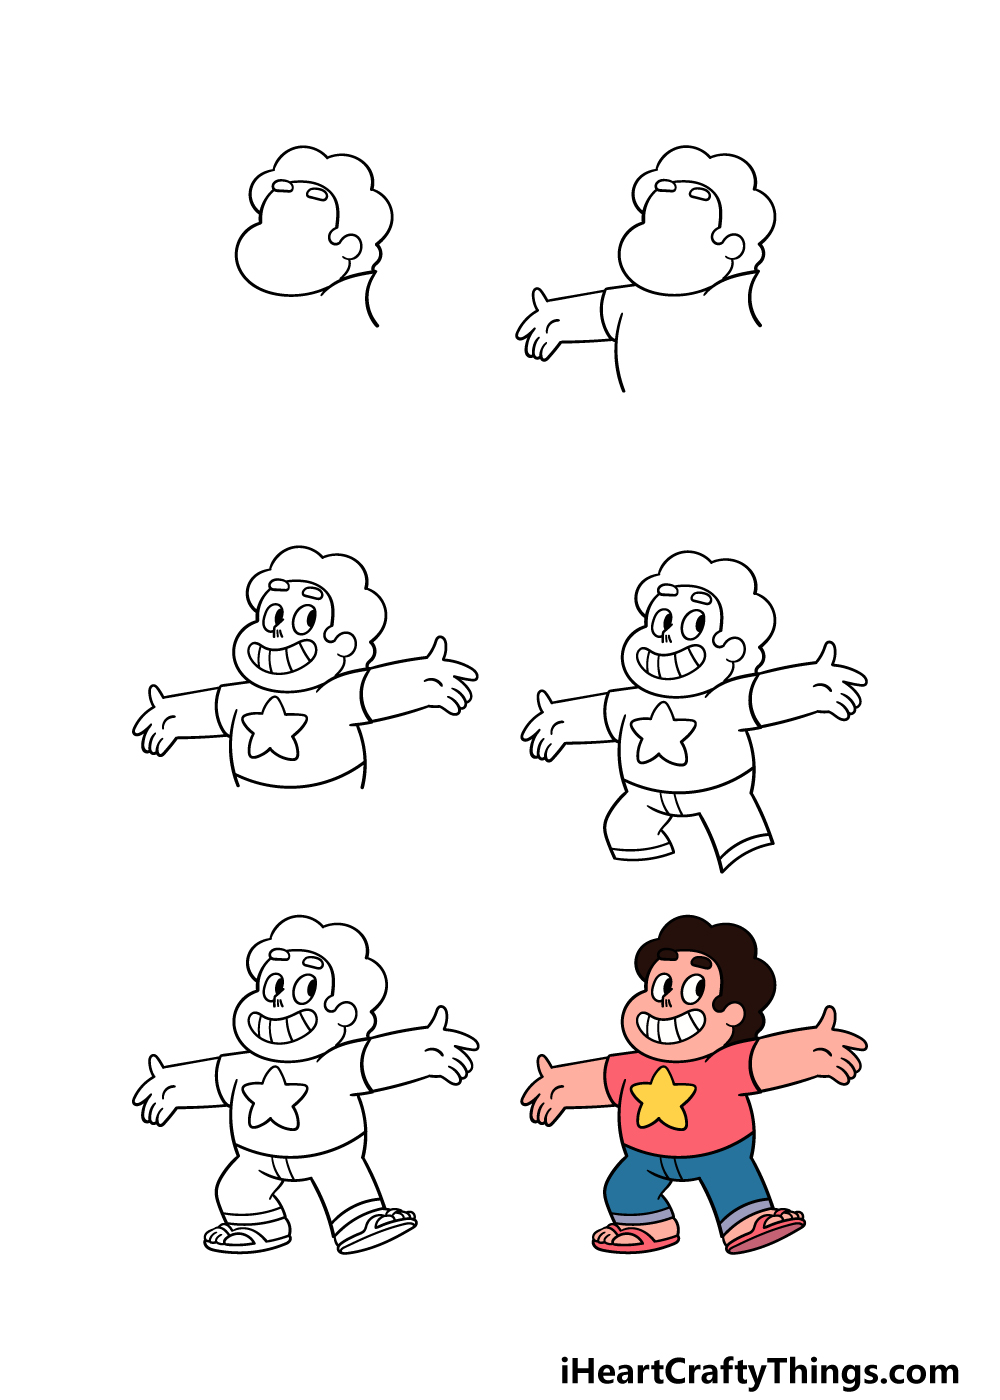 how to draw steven universe in 6 steps